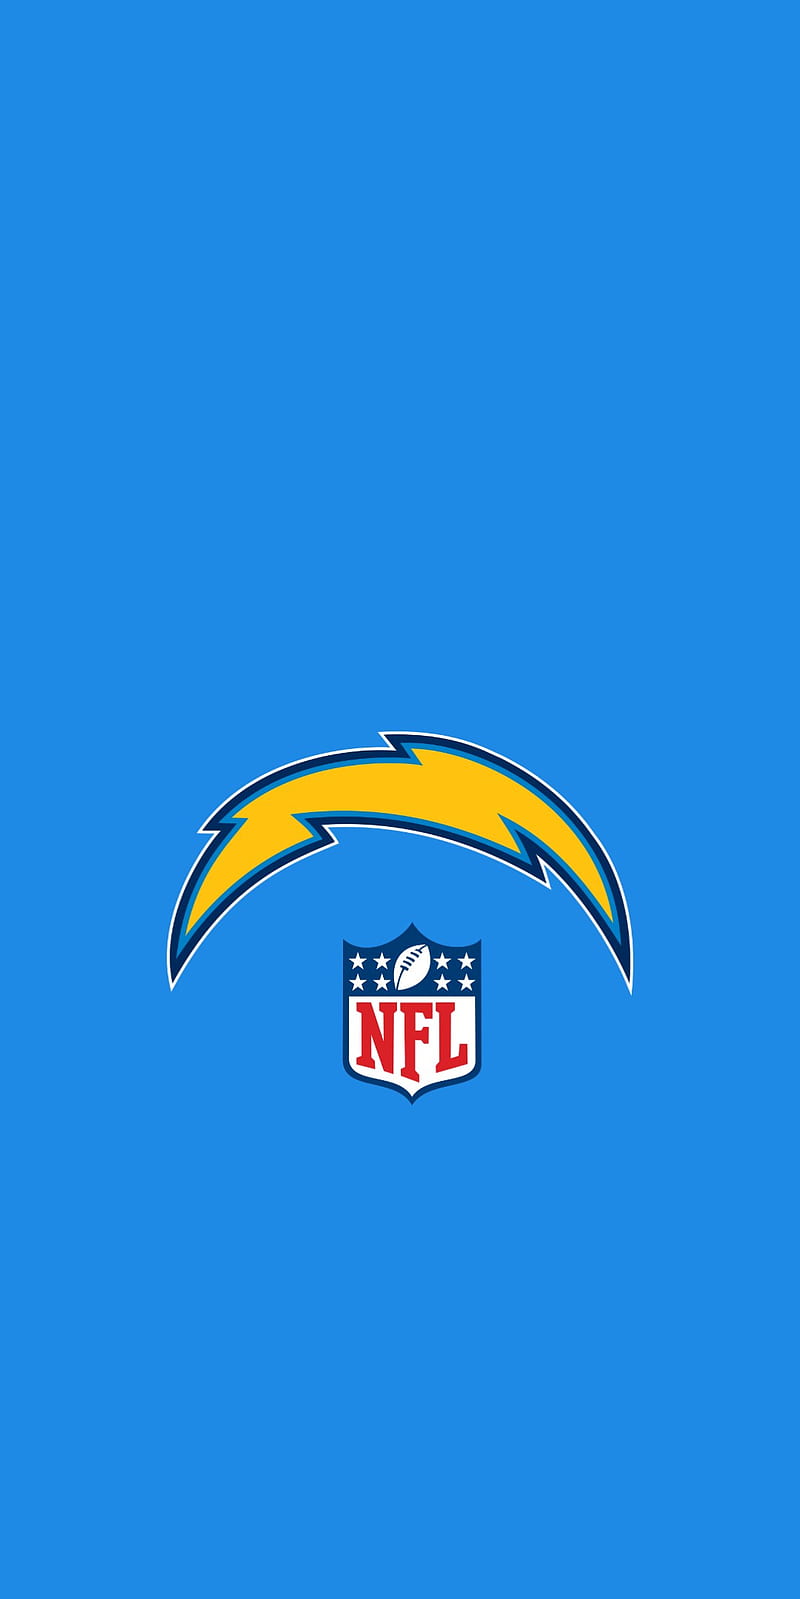 Chargers wallpaper by 3lack3olt  Download on ZEDGE  8faf